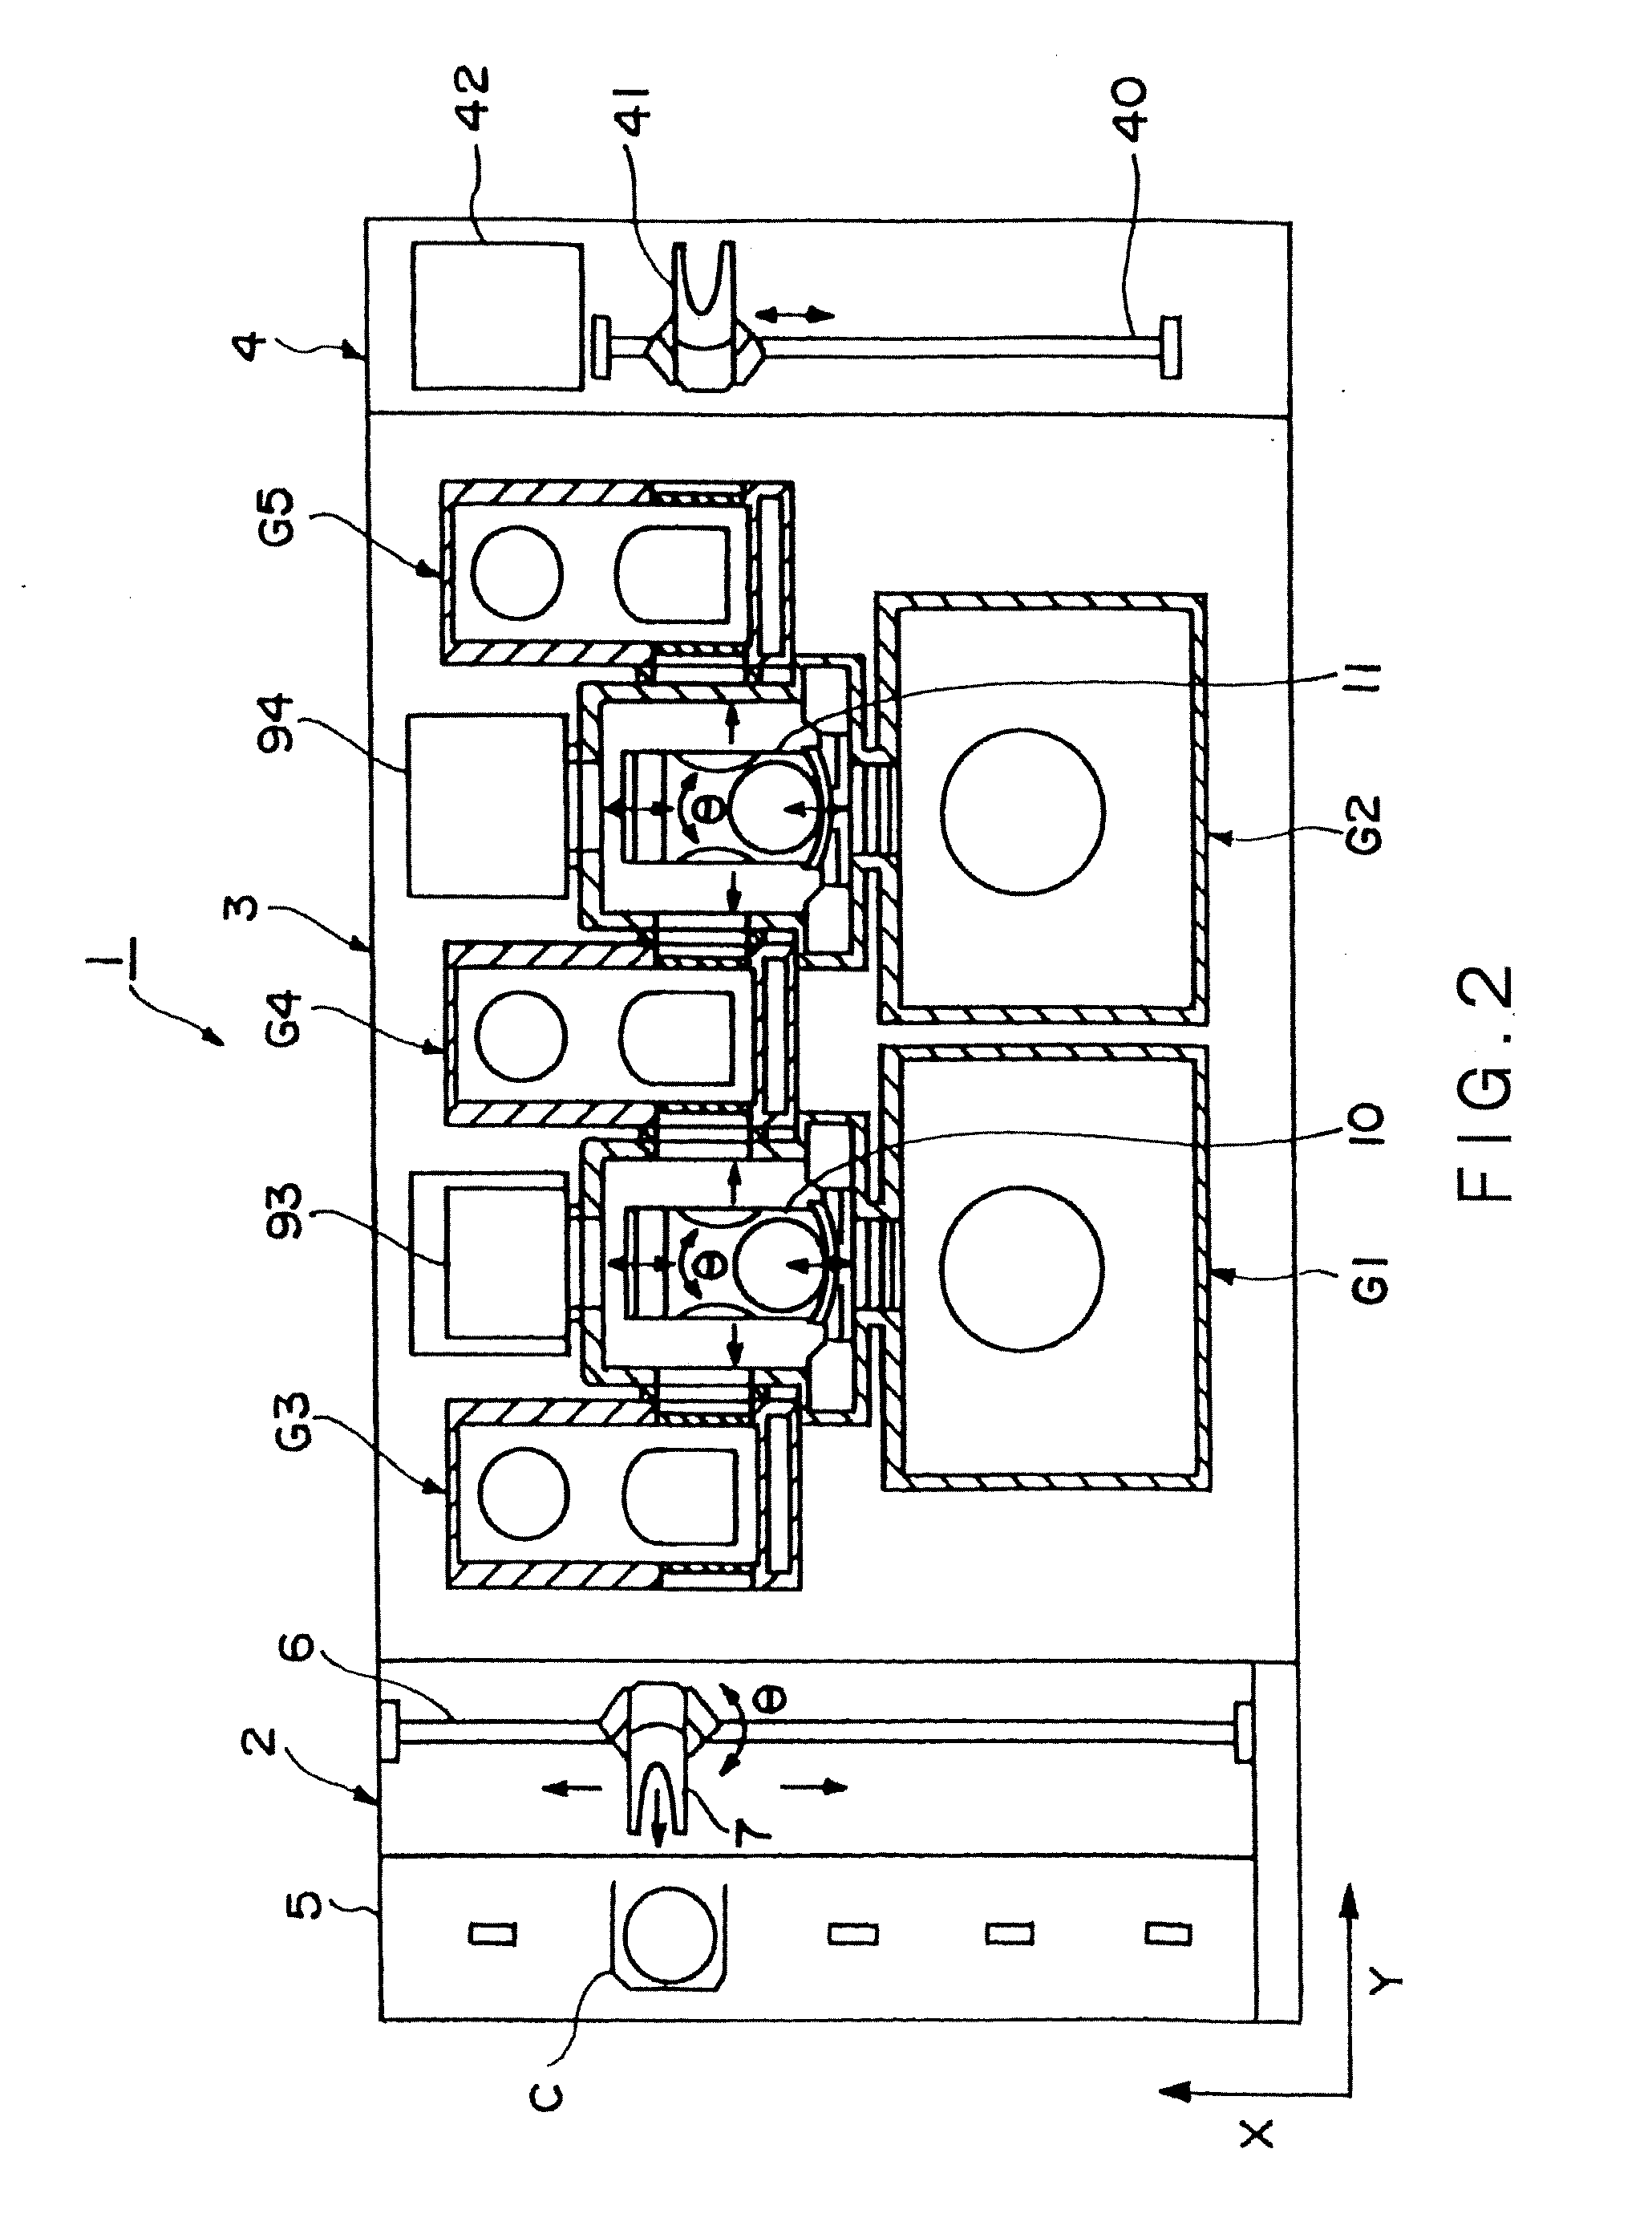 Substrate processing system, substrate processing method and computer-readable storage medium storing verification program